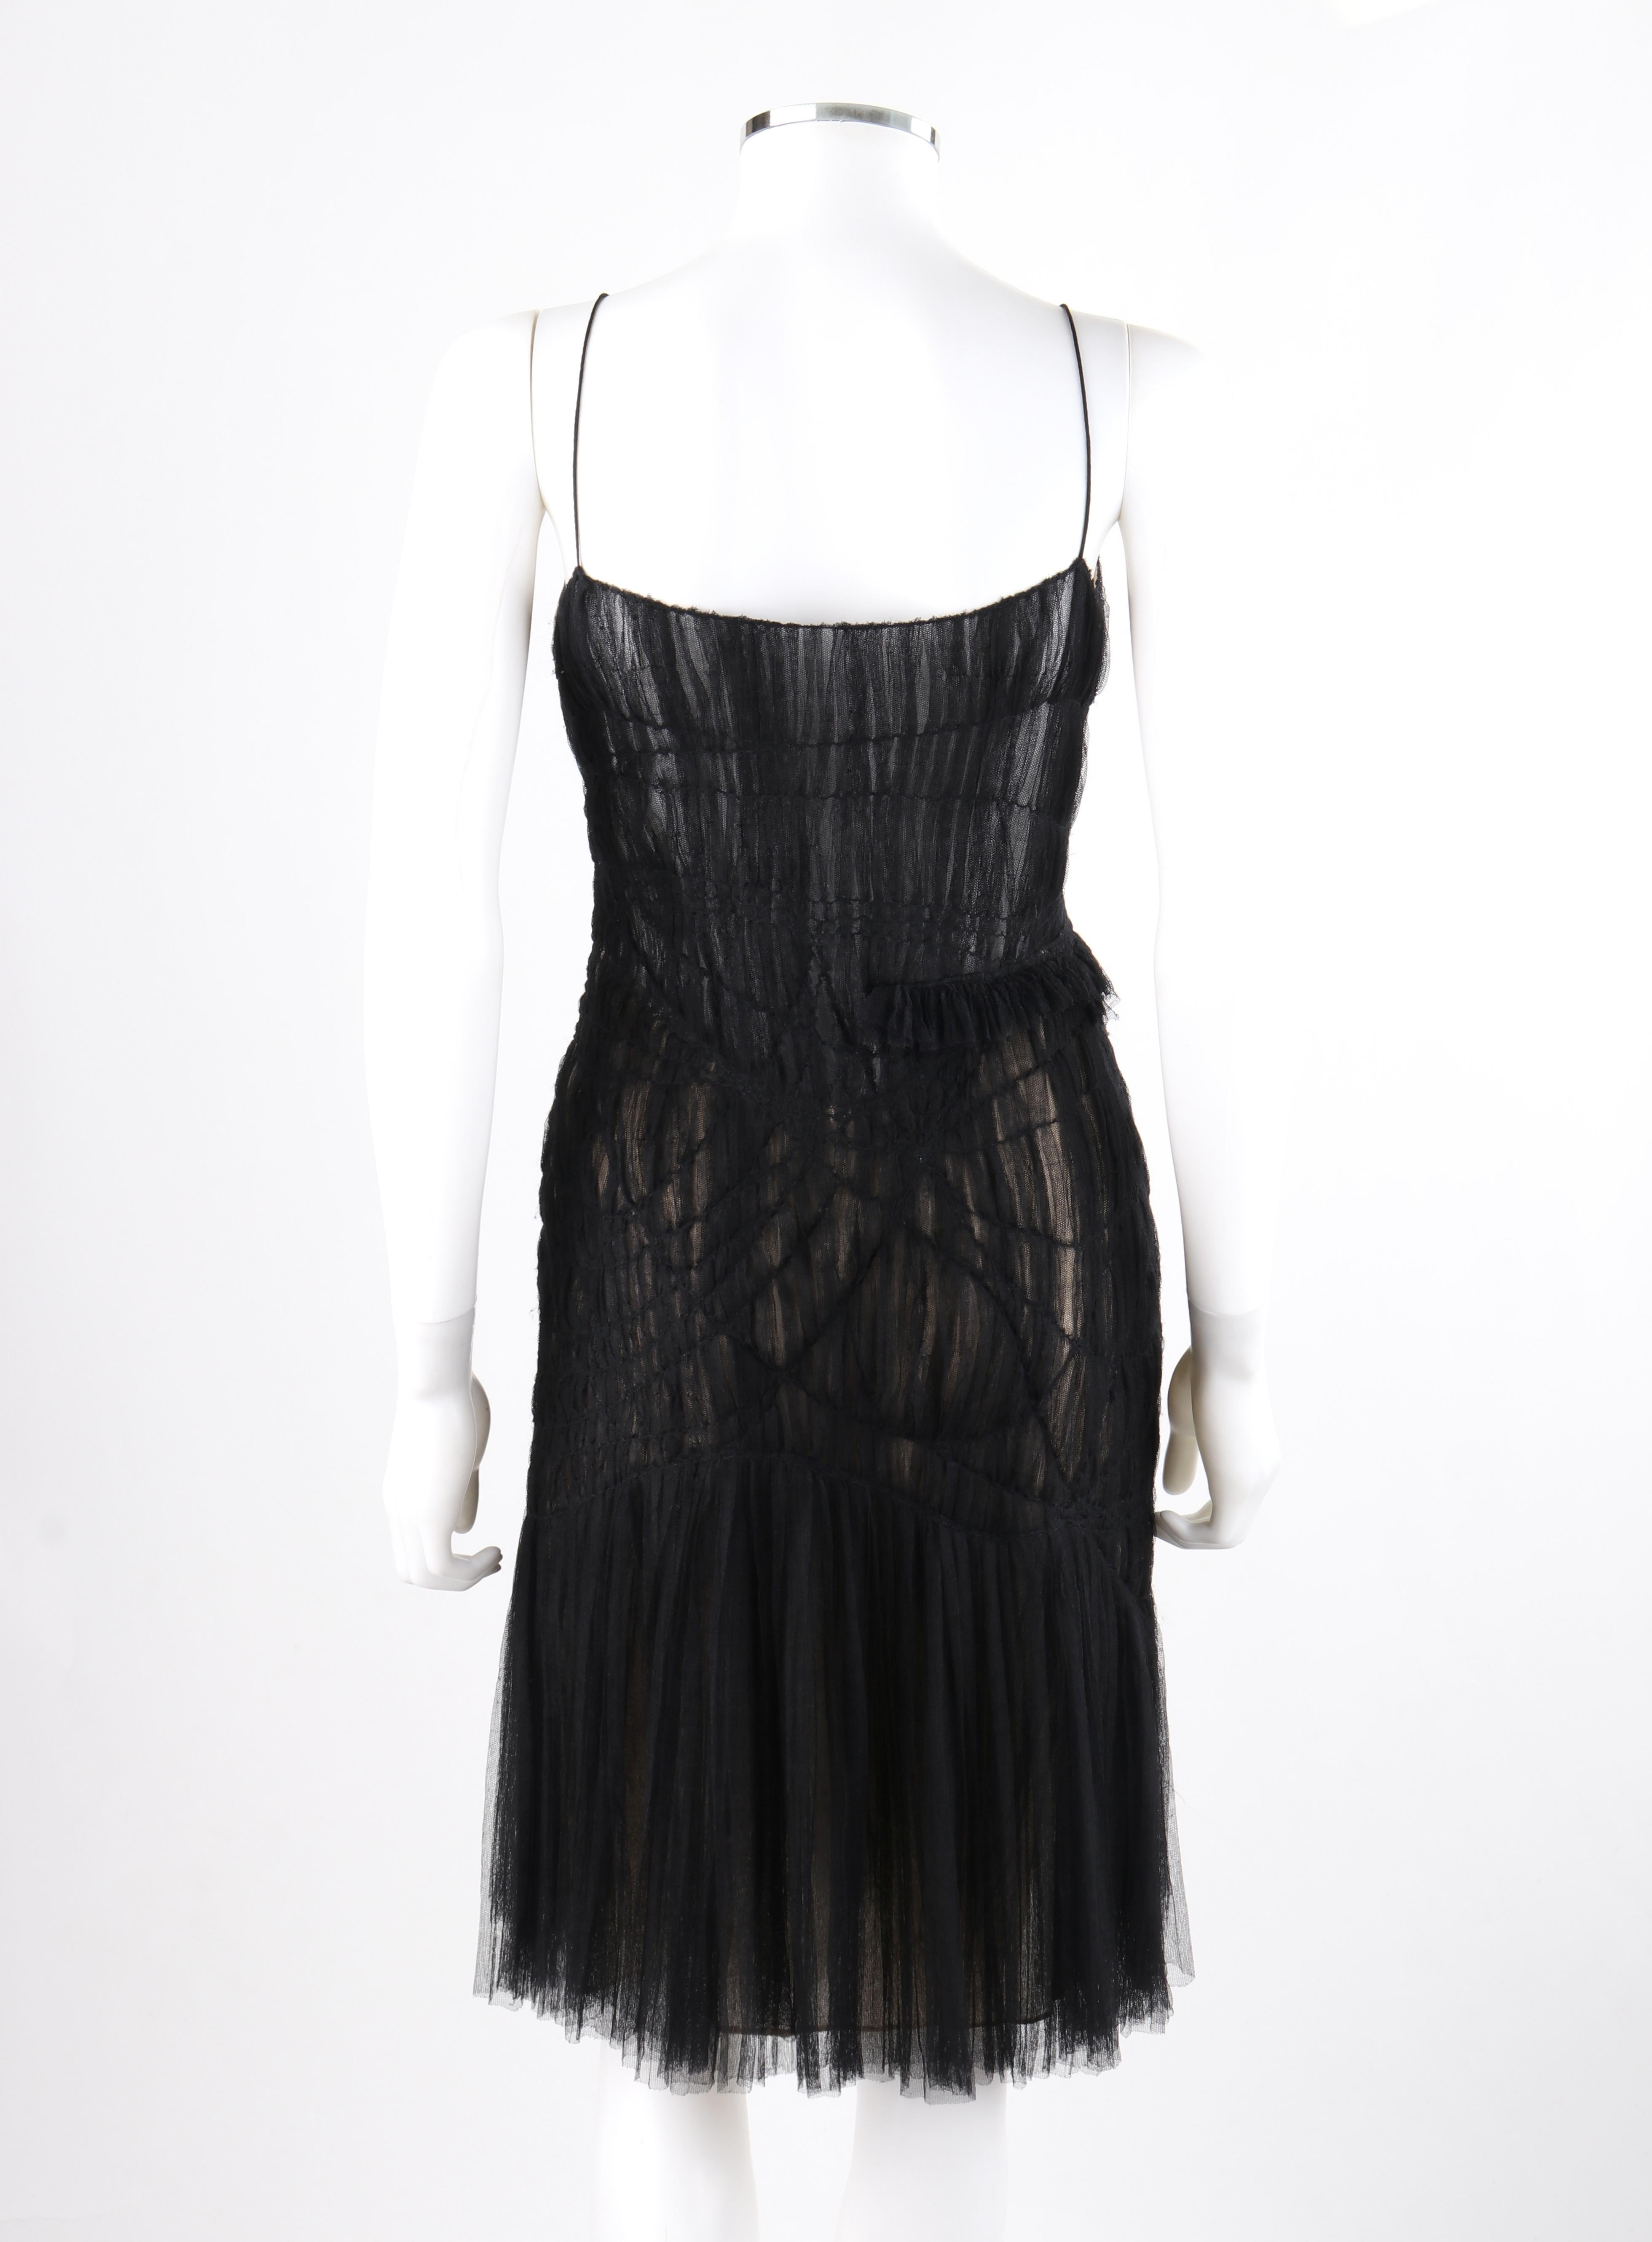 ALEXANDER McQUEEN S/S 2003 “Irere” Black Gathered Layer Tulle Mesh V Neck Dress In Good Condition For Sale In Thiensville, WI